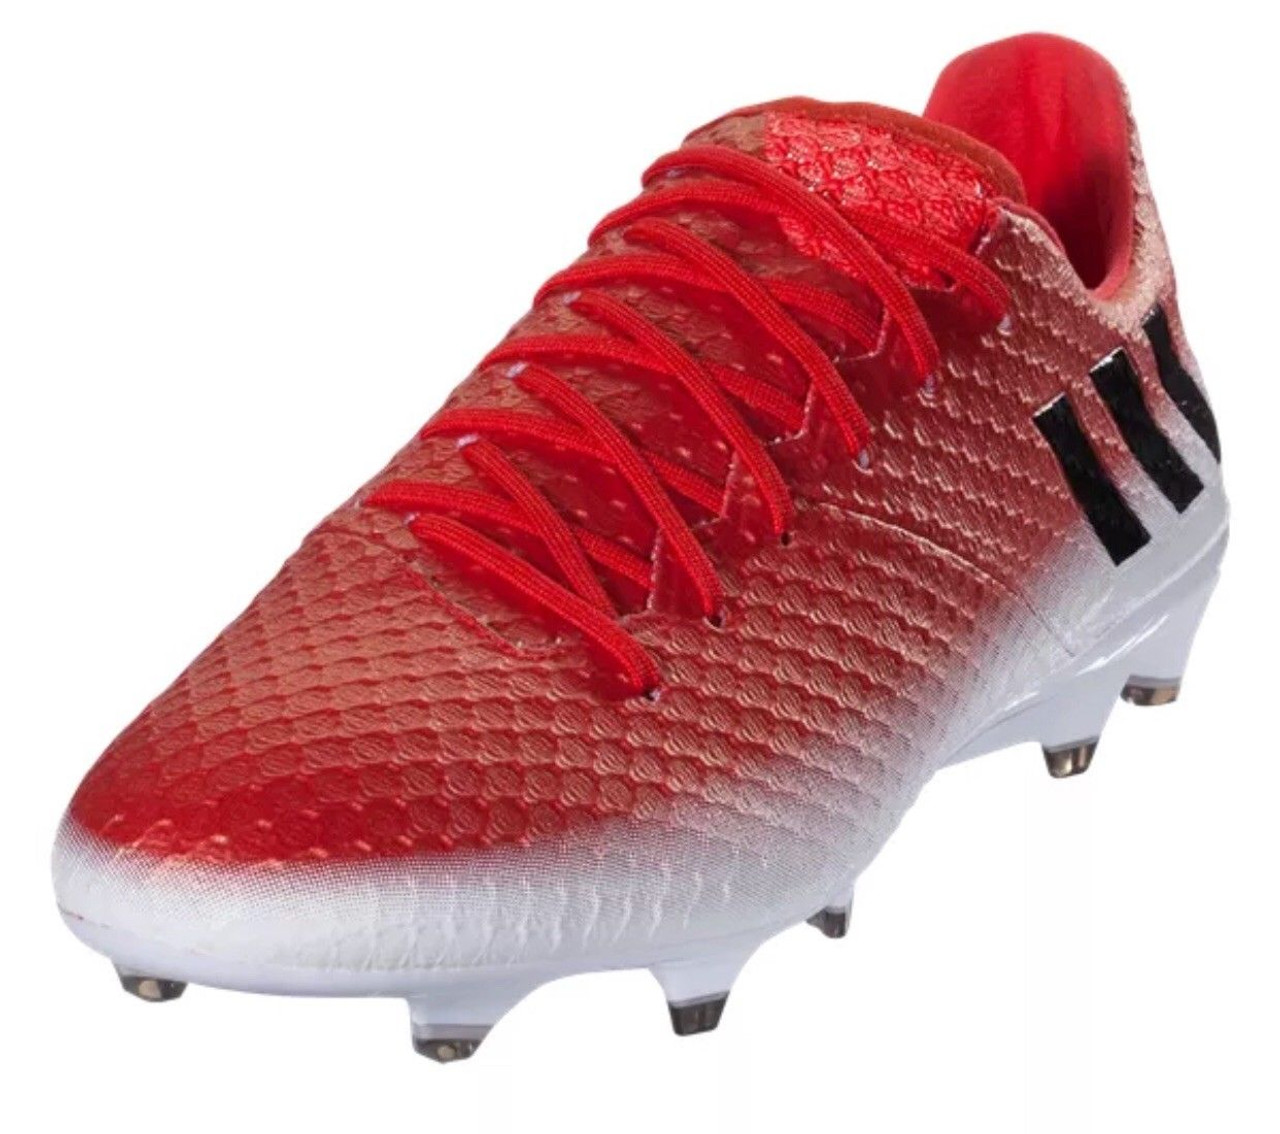 Adidas Messi 16 1 Fg Red Core Black White Ohp Soccer